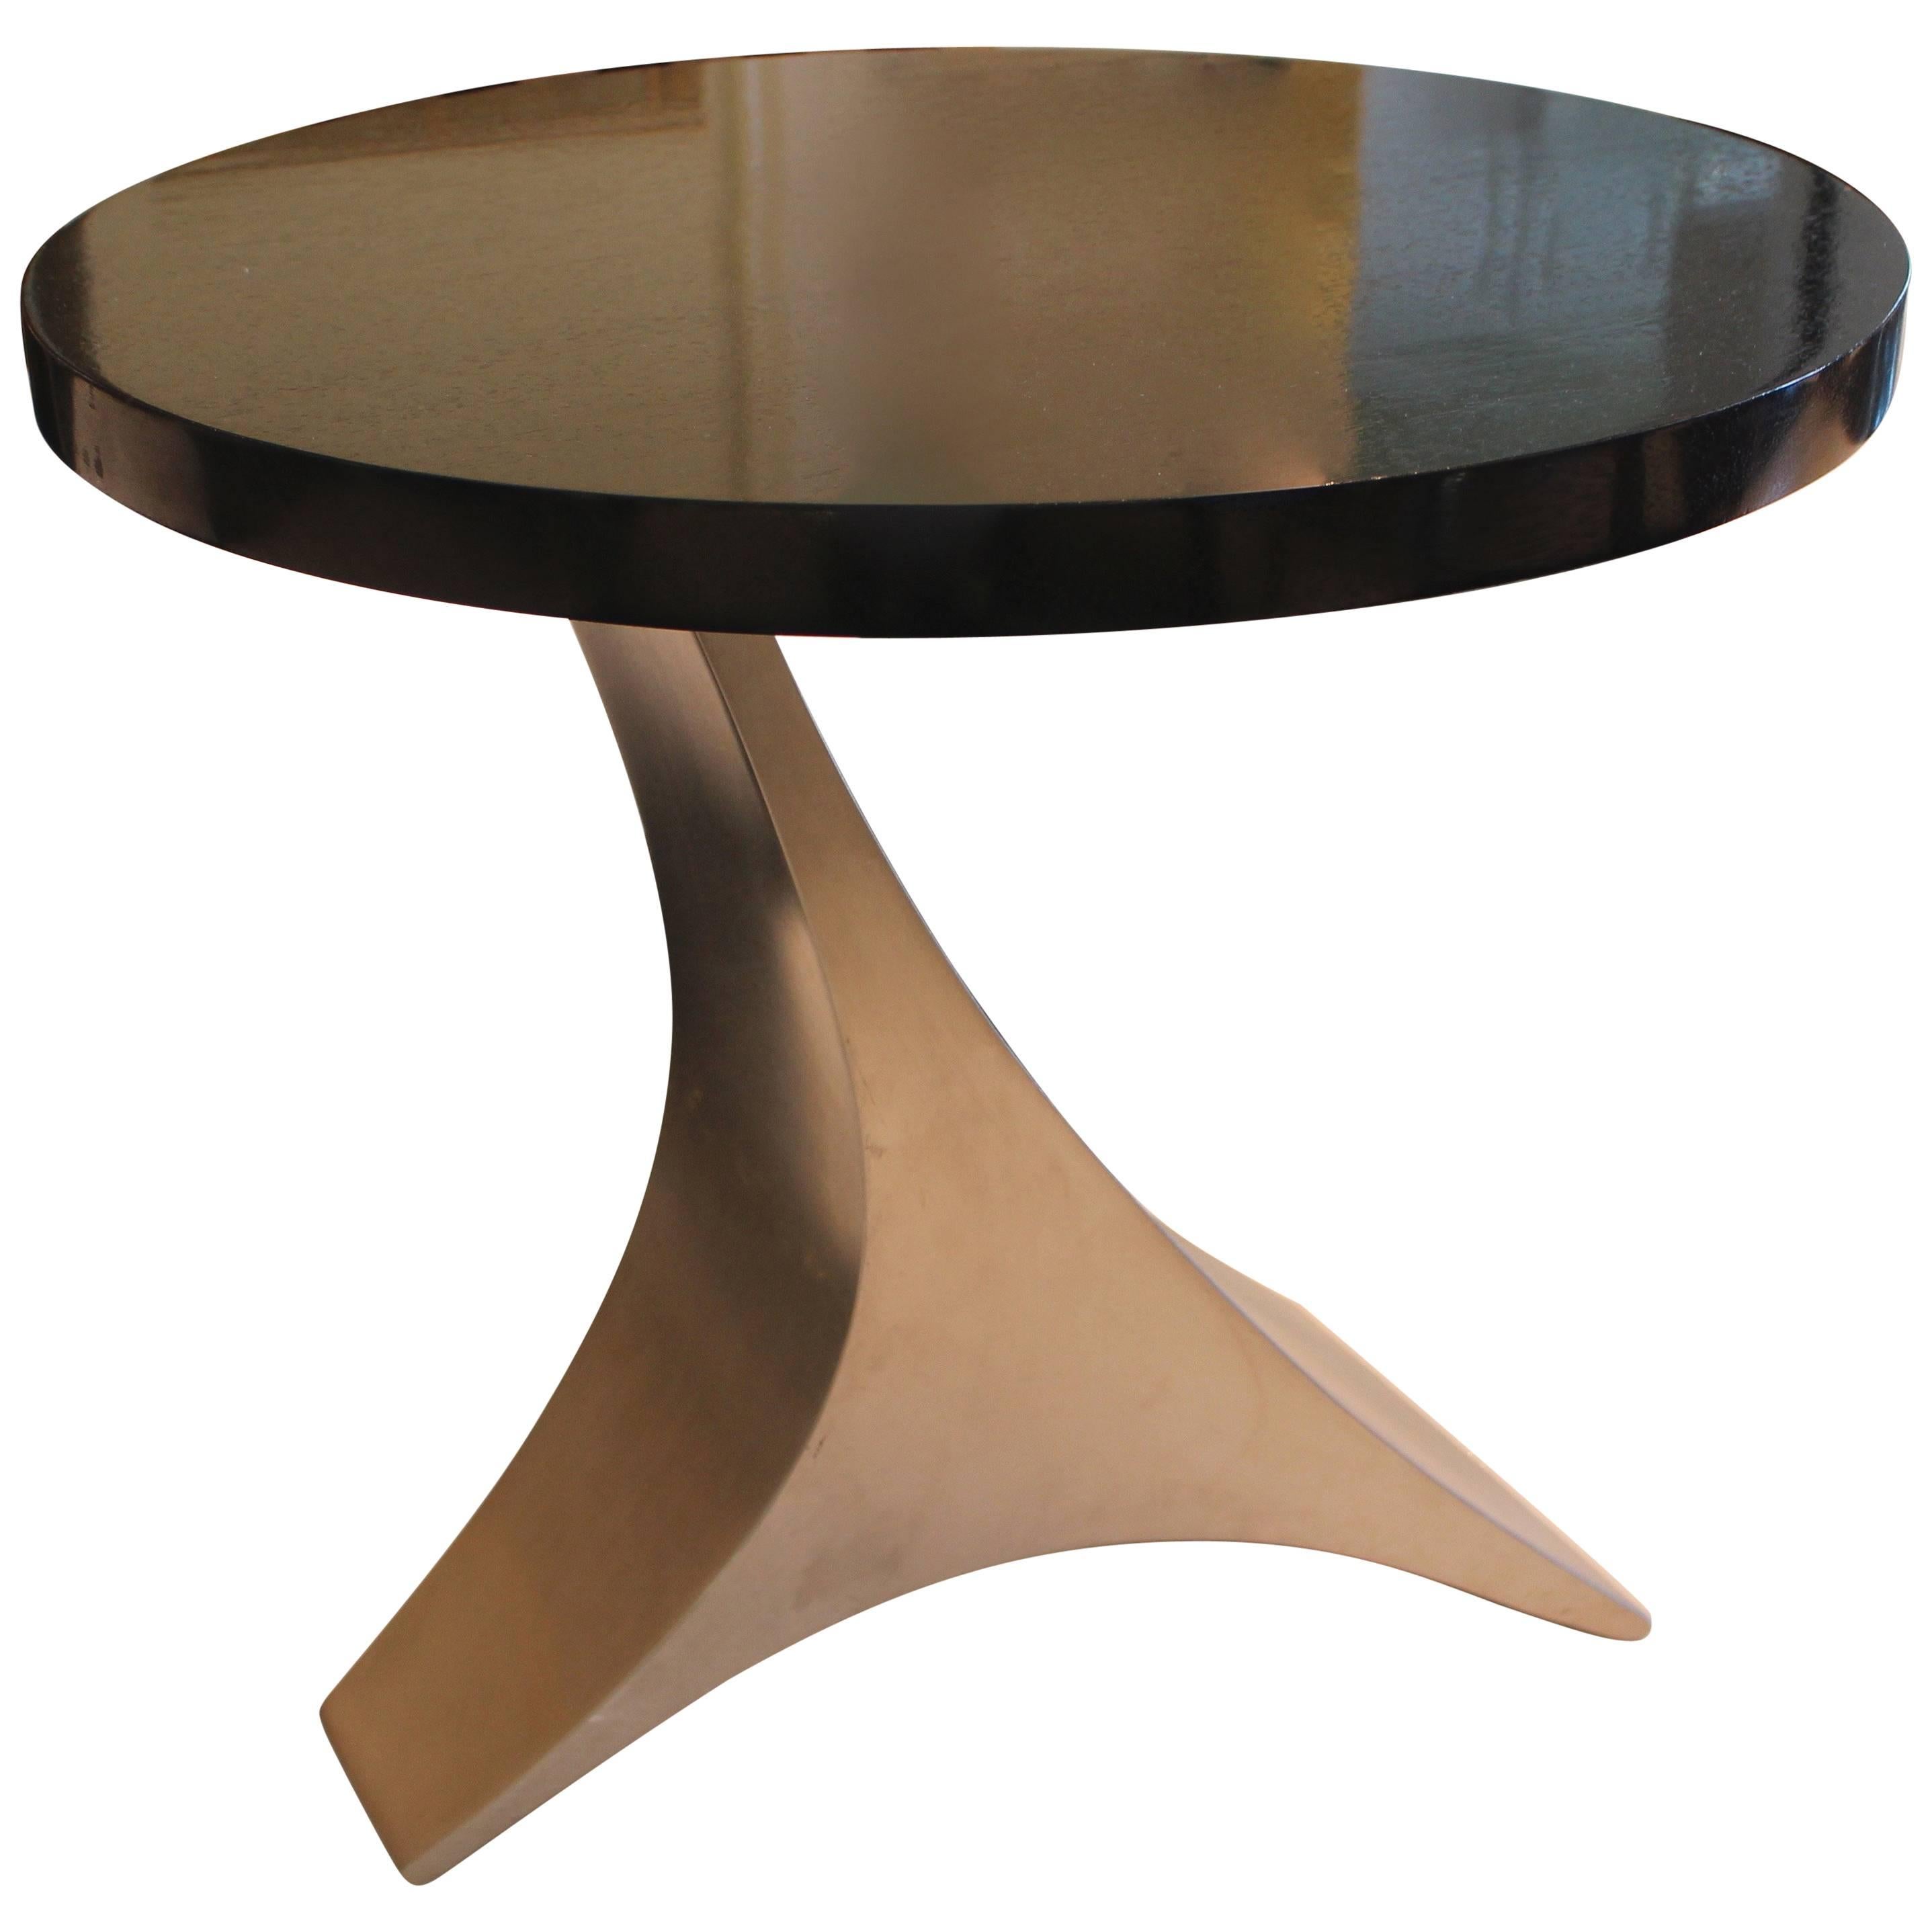 Small and Stylish End Table with Dark Brown Top over Curved Chrome Base